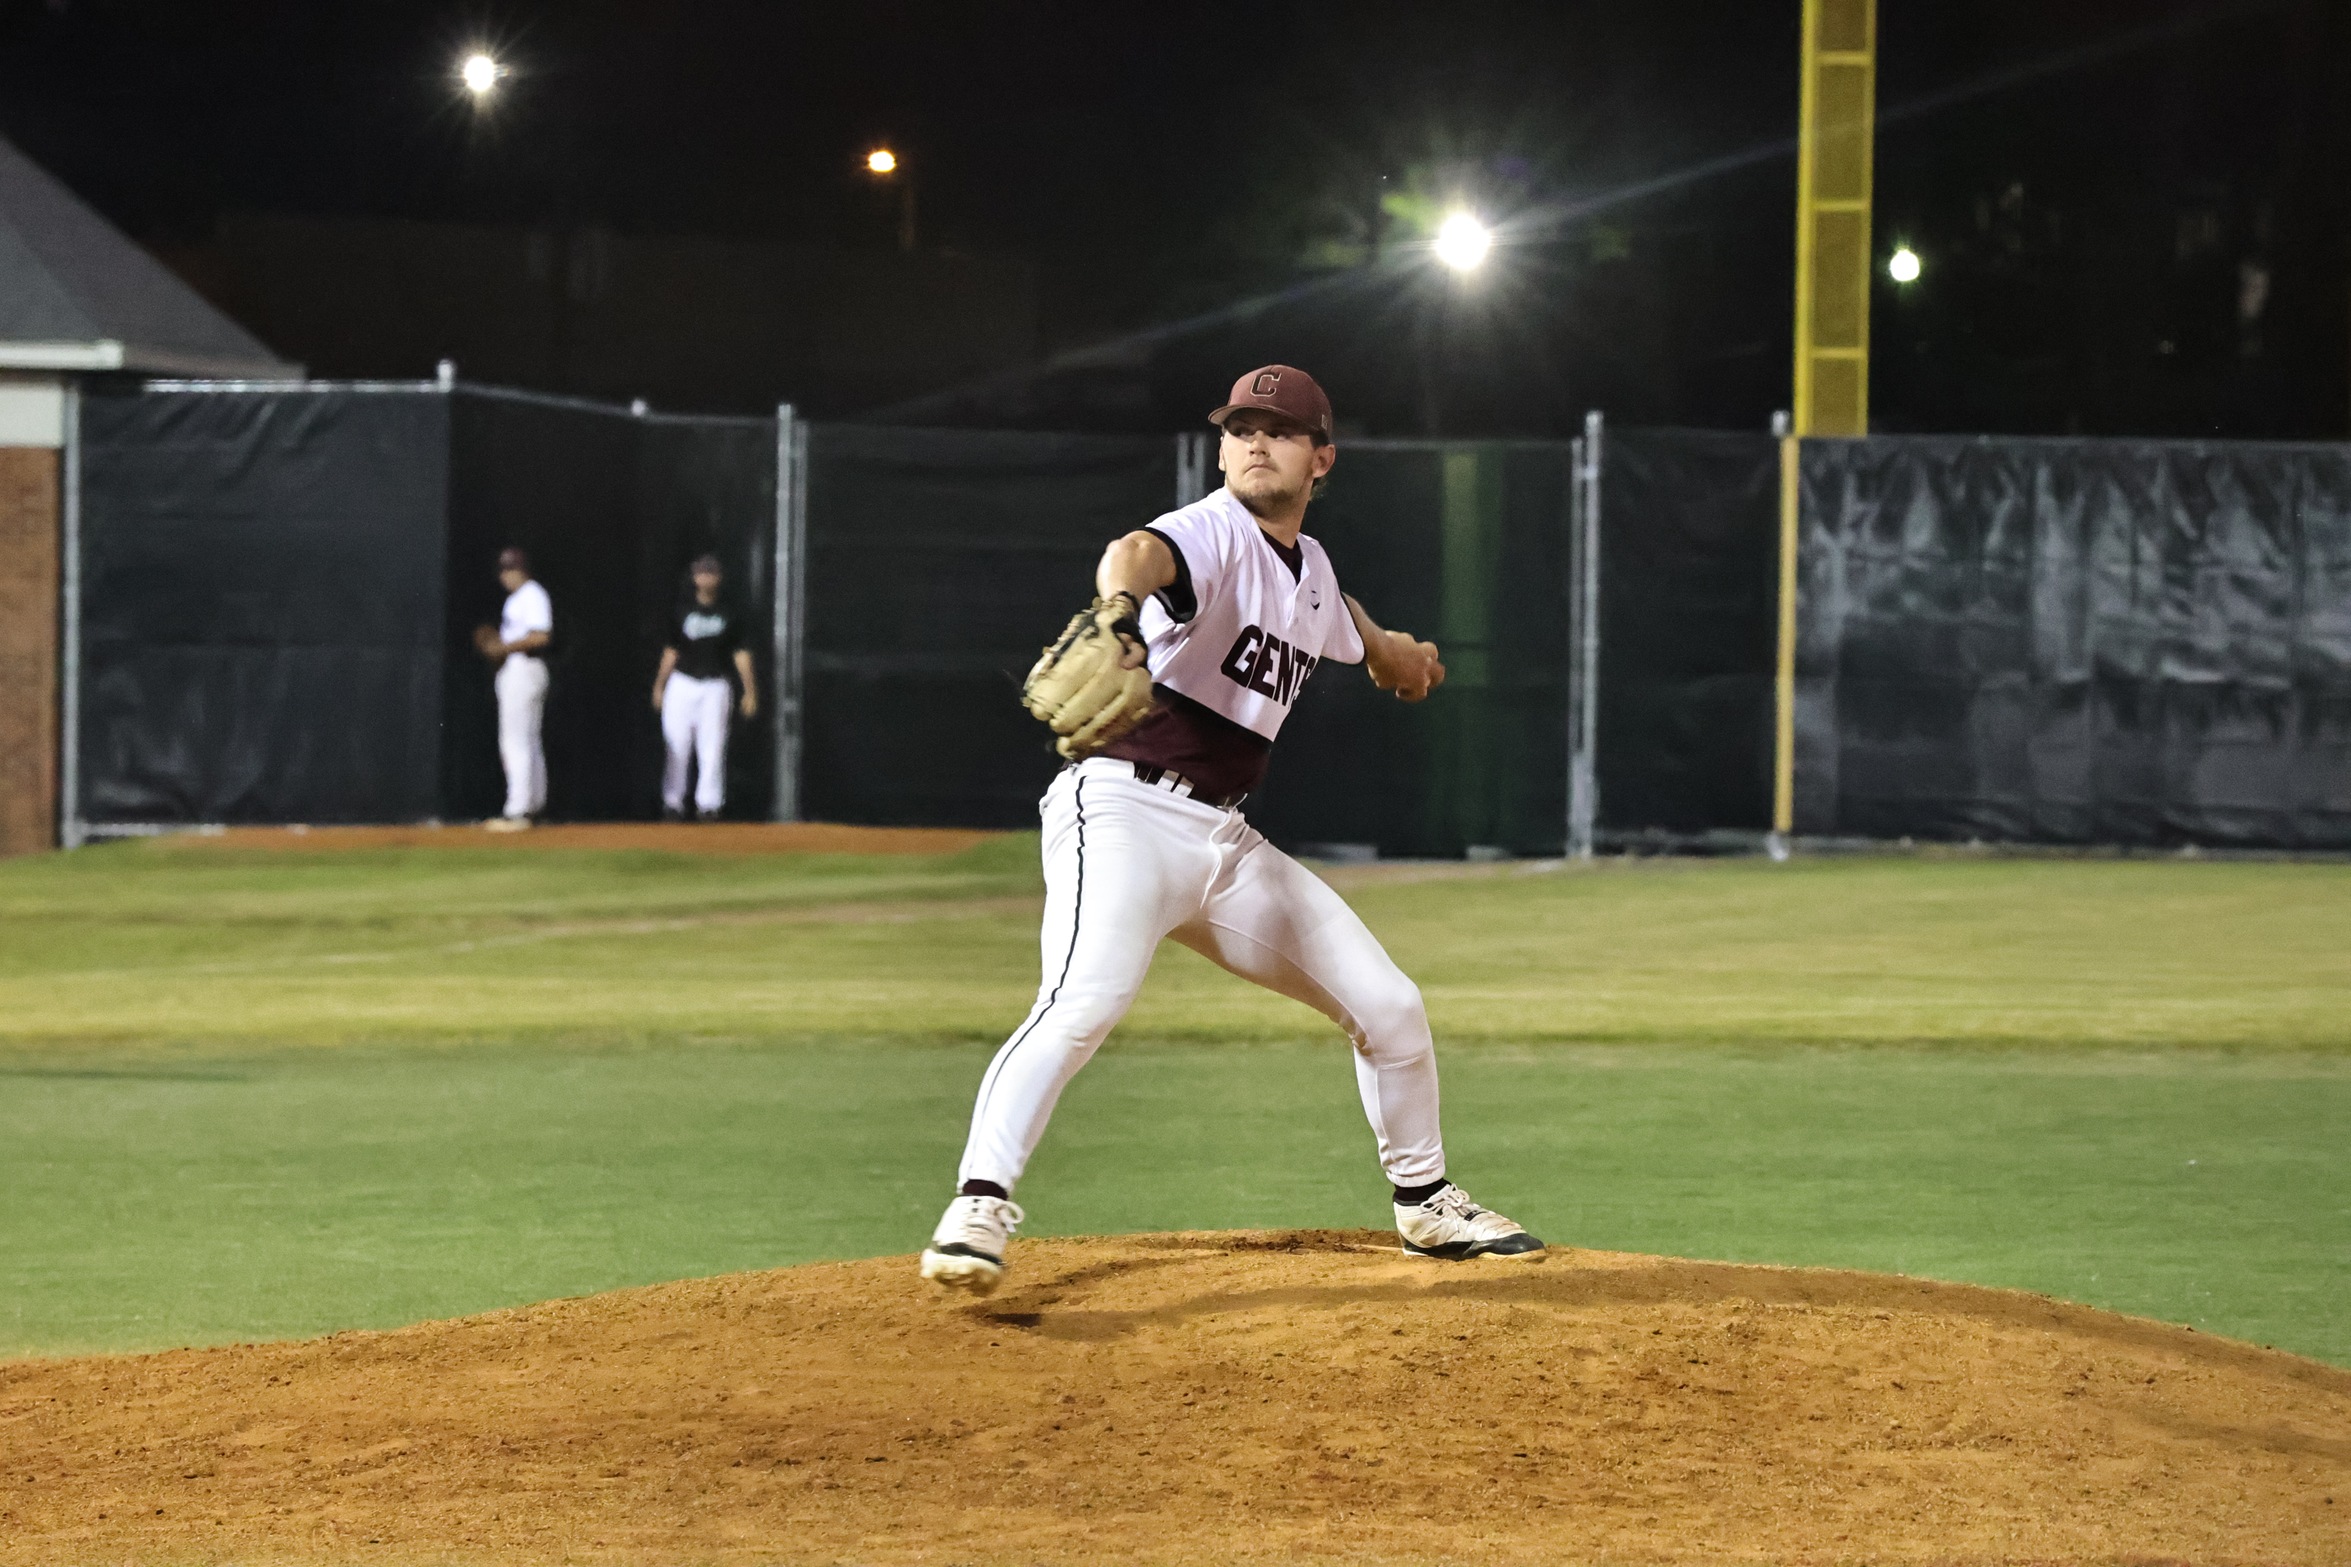 Sophomore LHP Cody Myers went the distance and recorded 10 K's on Friday night.